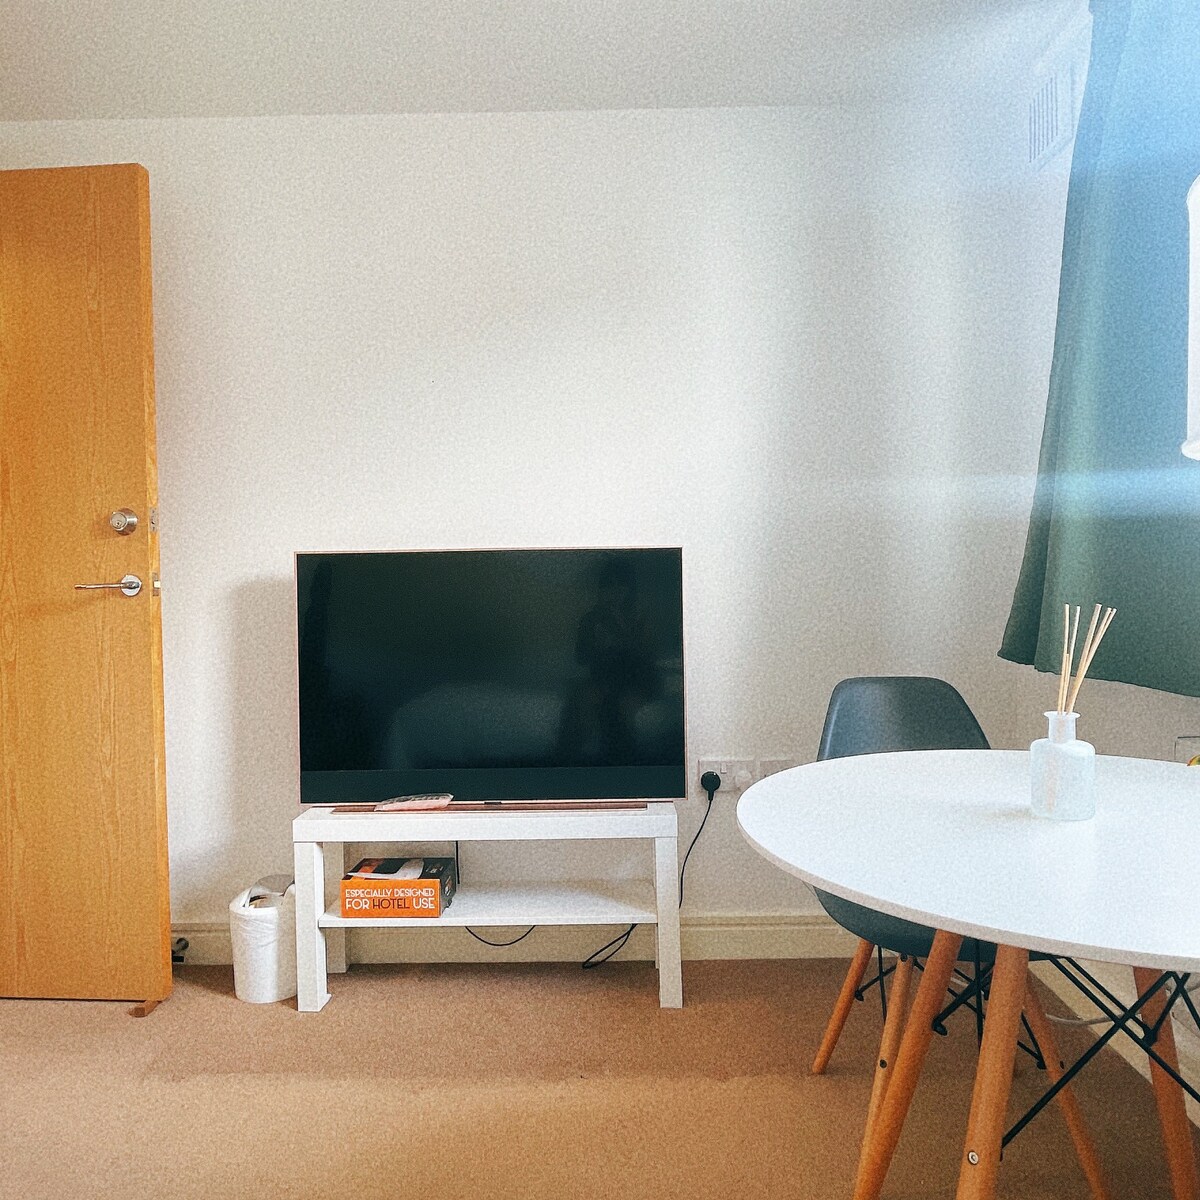 Friendly & Clean budget stay at Exeter City Centre